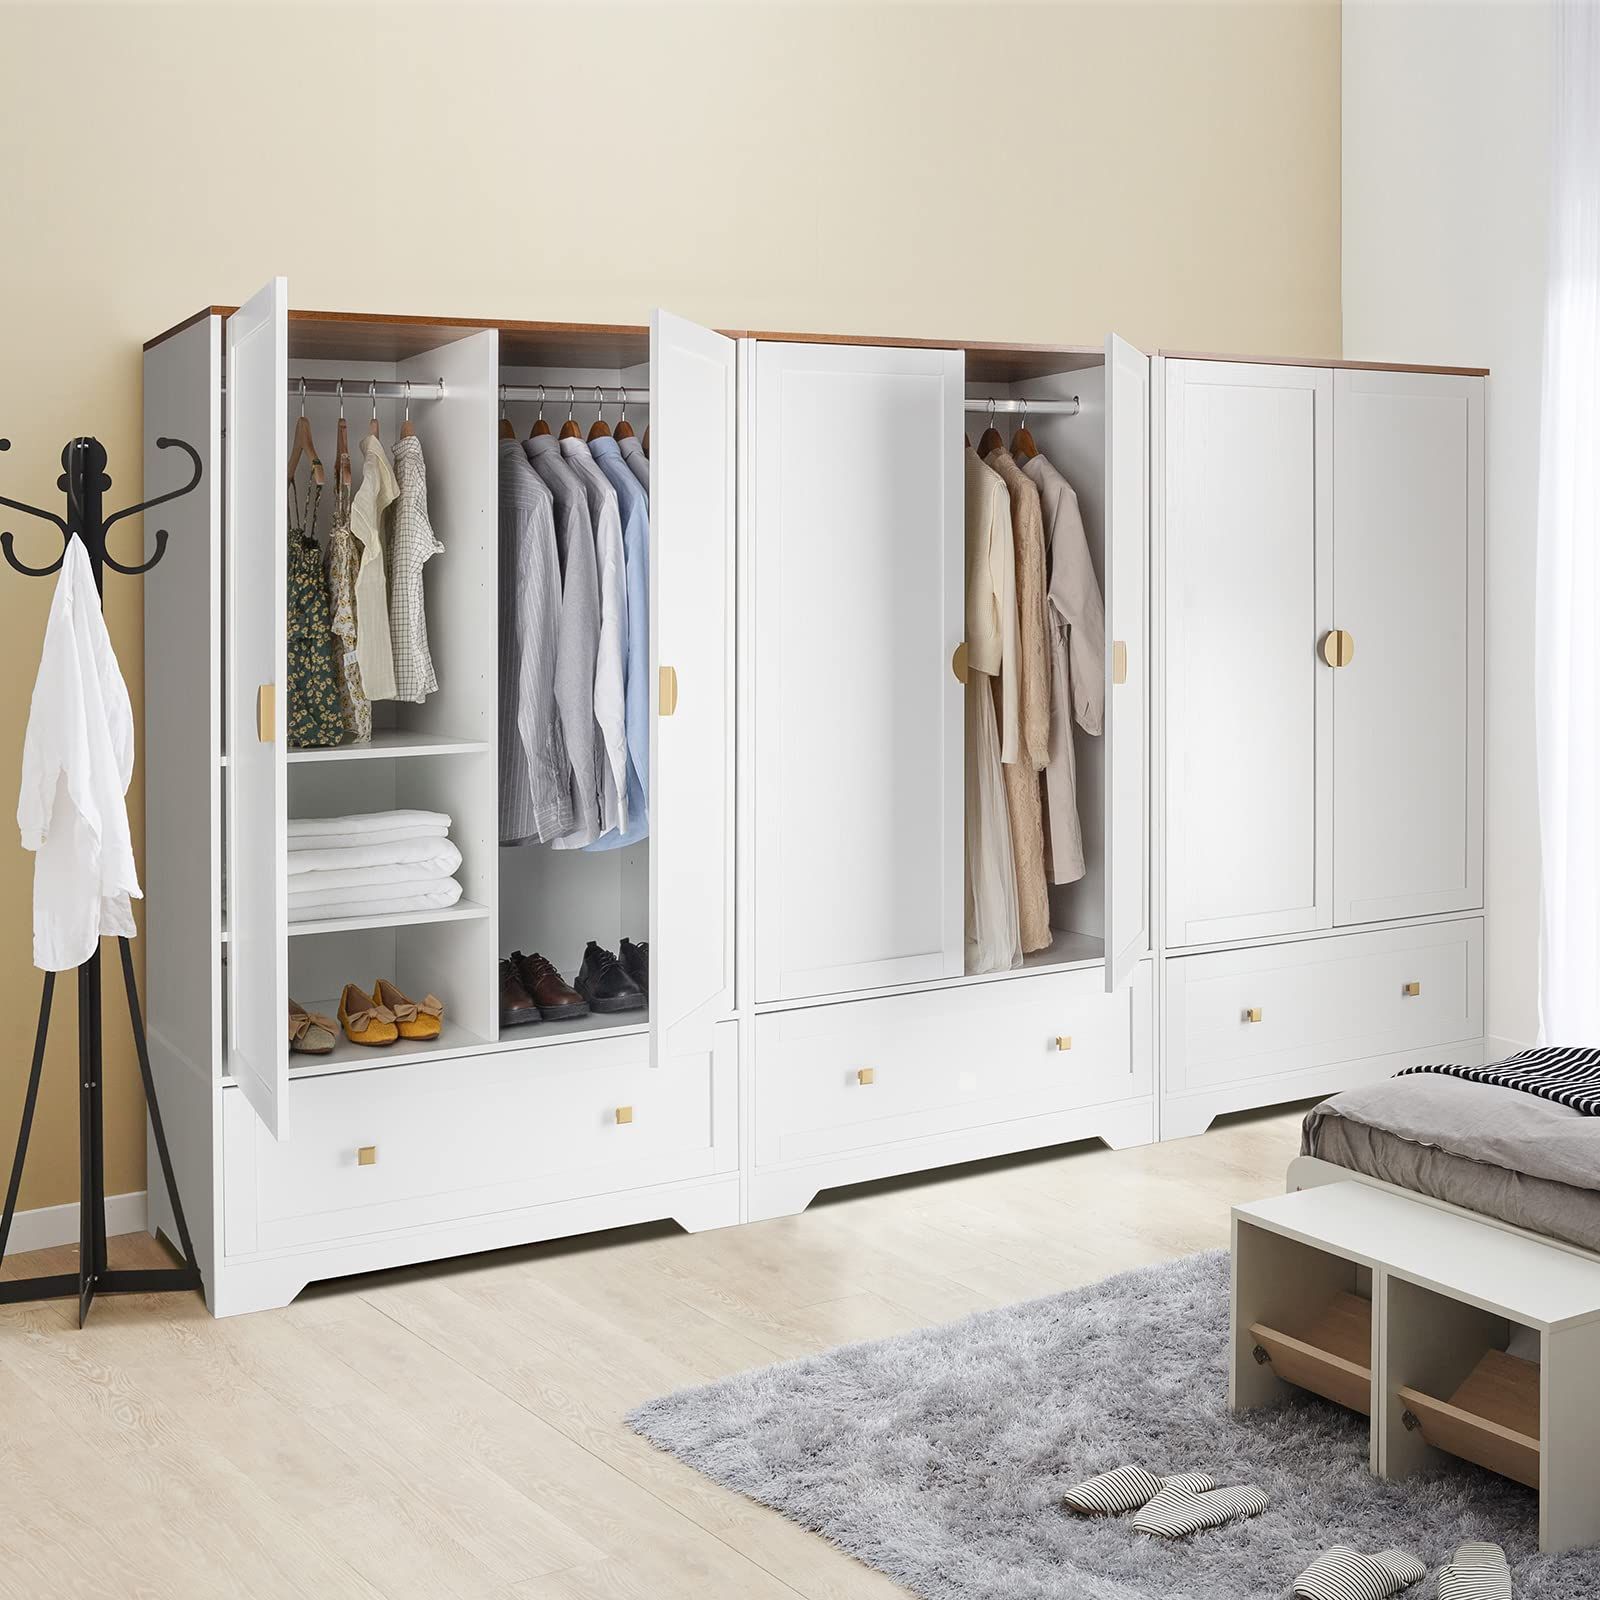 Preferred Amazon: Vingli Wide Wardrobe Closet, White Armoire Wardrobe With Hanging  Rod, Shelves And Drawer, Freestanding Closet Wardrobe Cabinet, Armoires And  Wardrobes With Doors For Bedroom, Kids' Room, Dorm : Home & Kitchen In Wardrobes With Hanging Rod (View 10 of 10)